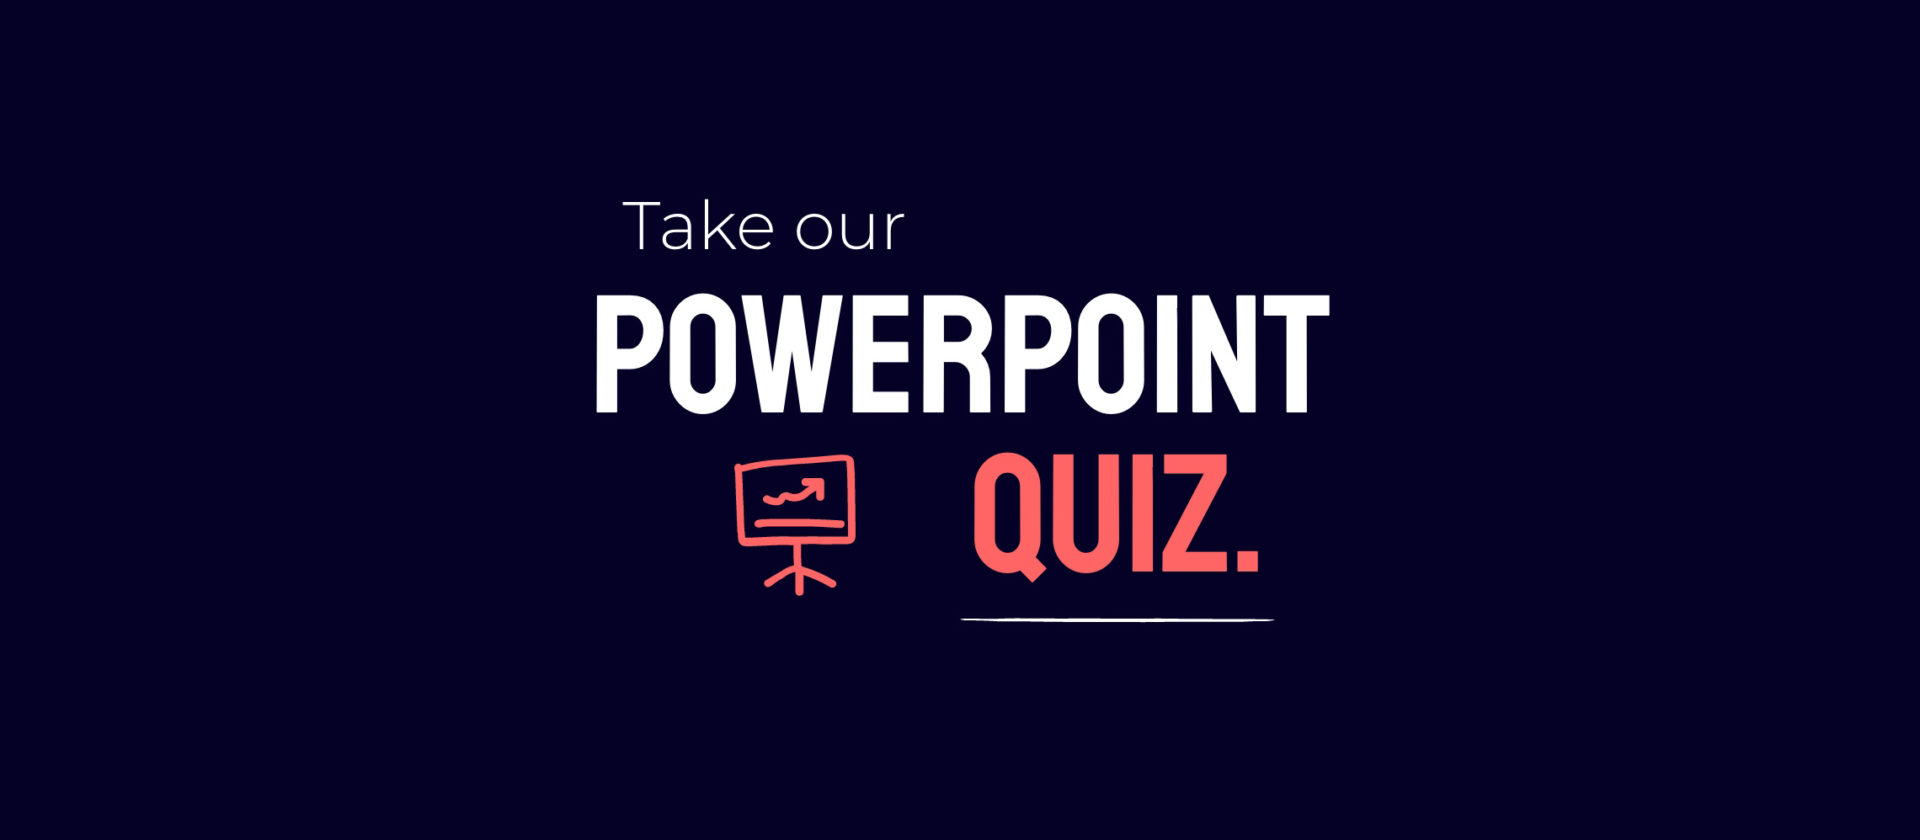 PowerPoint quiz: are you a PowerPoint pro?